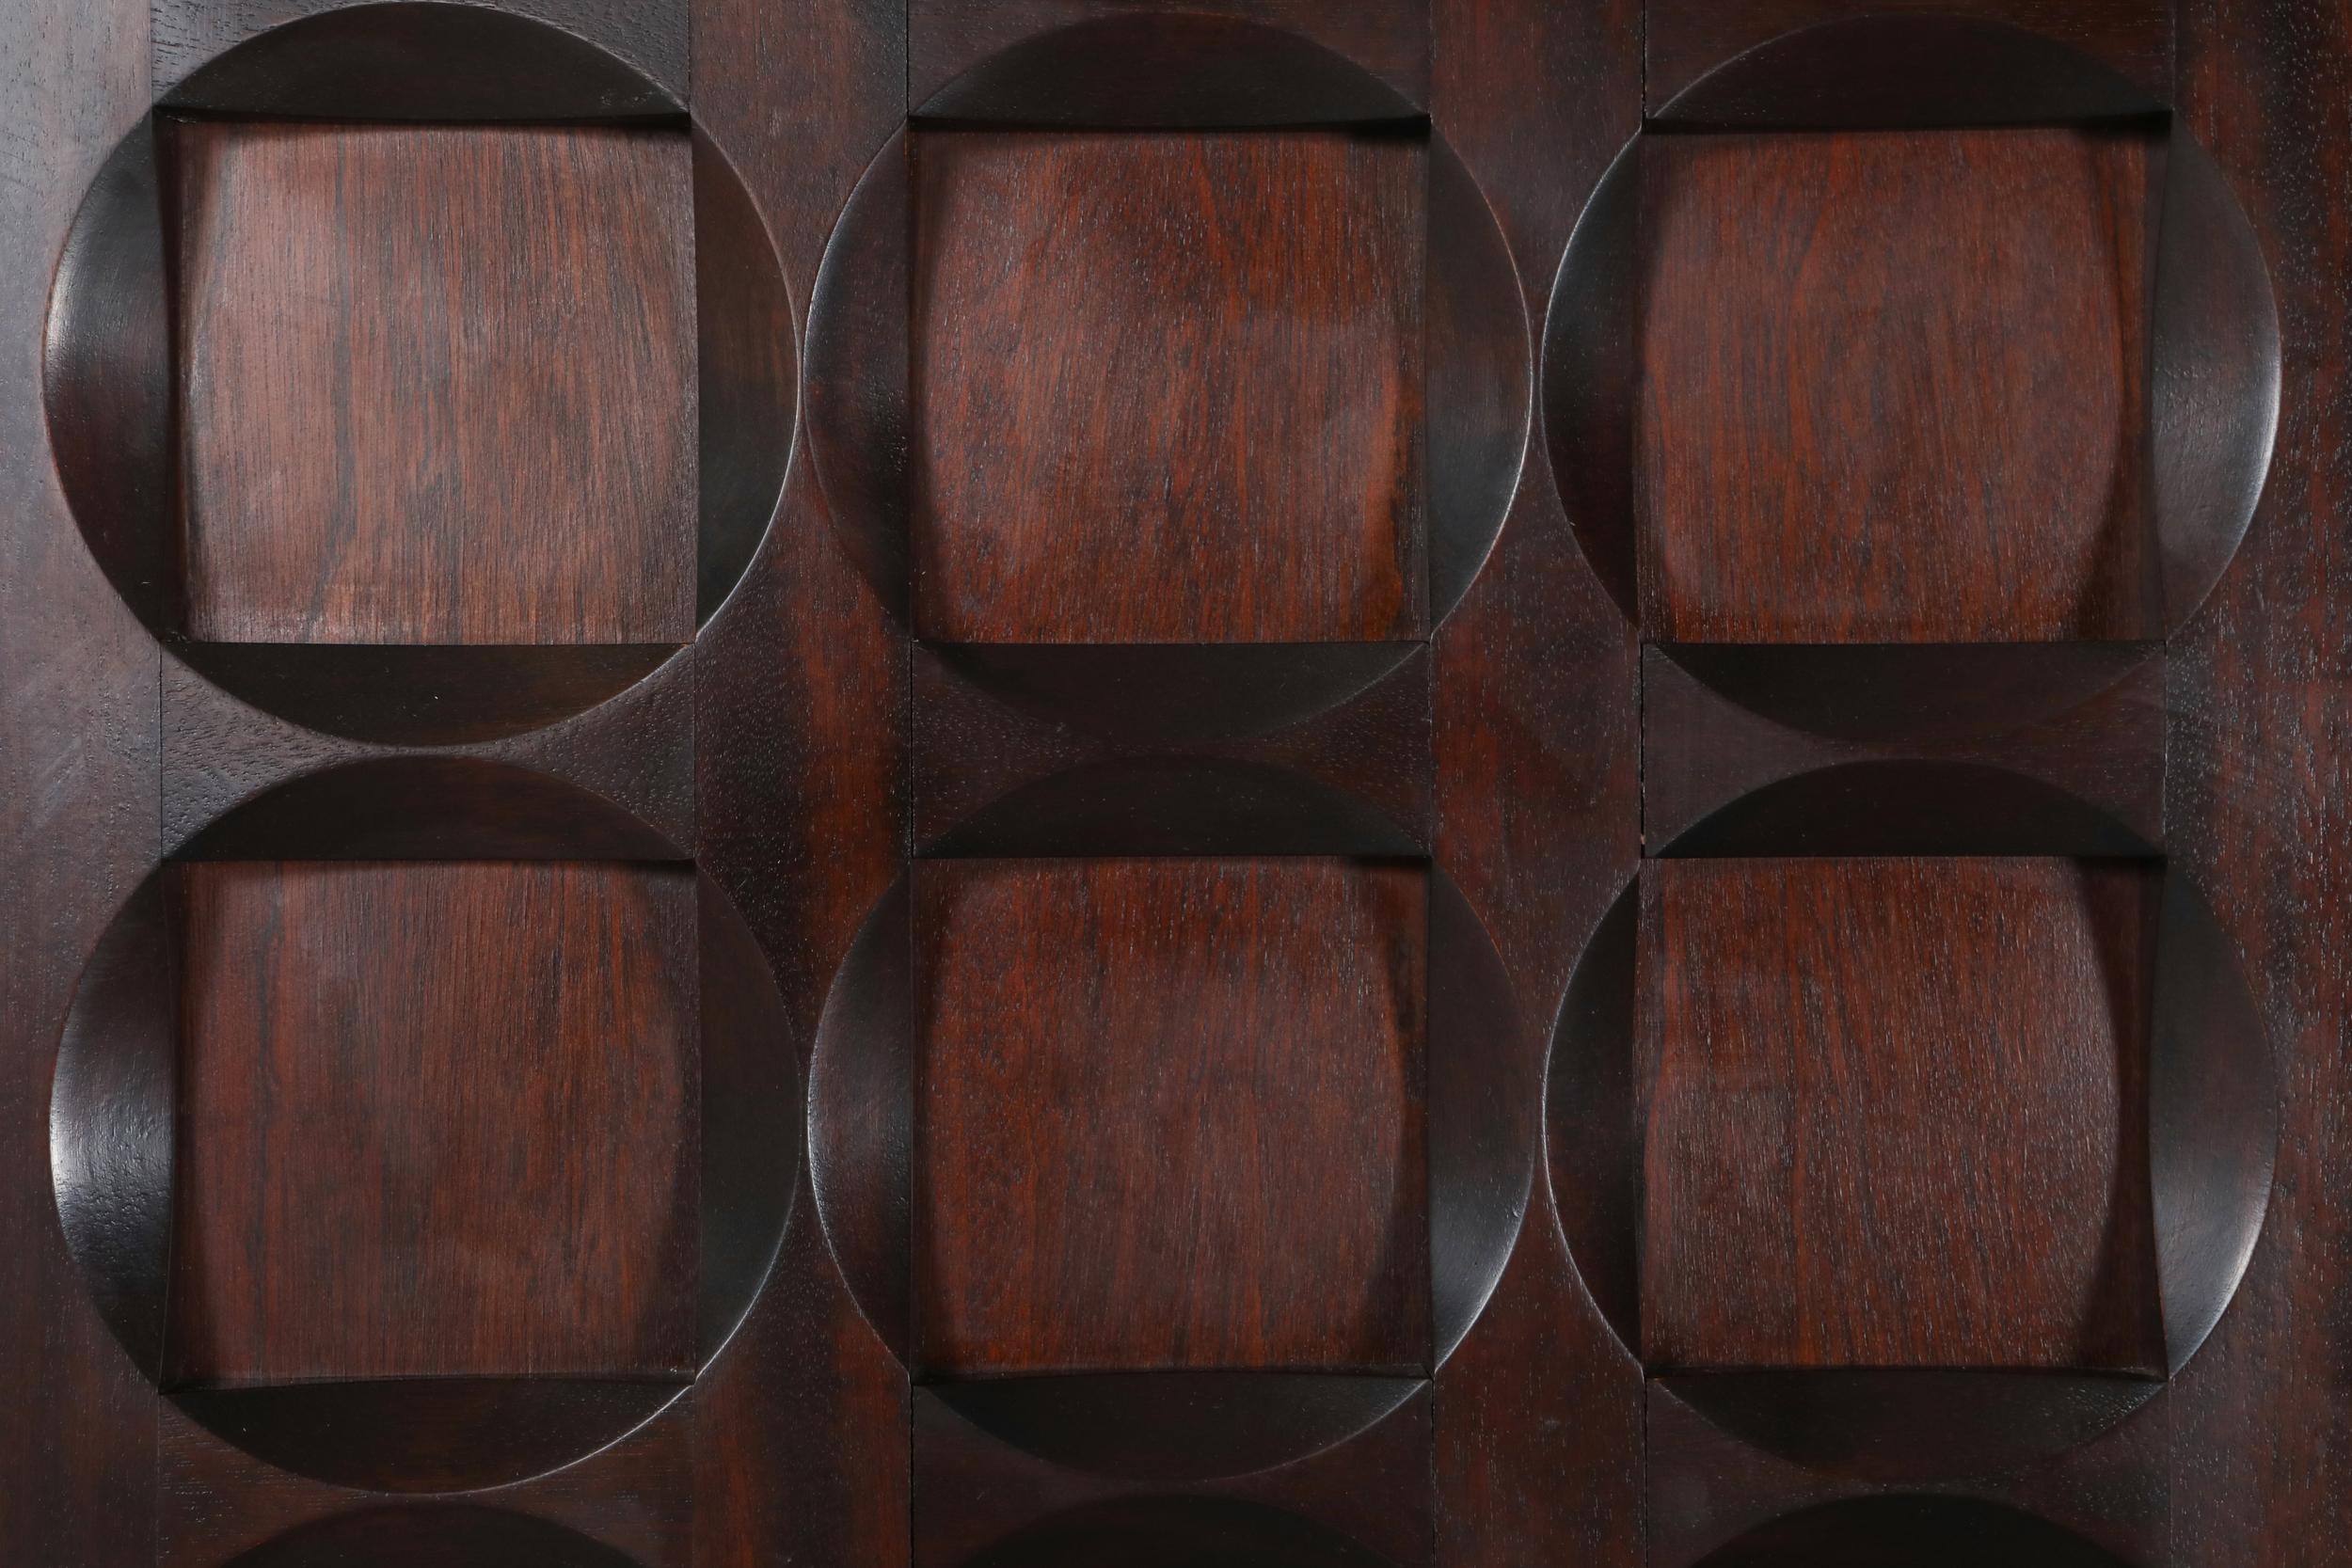 Mahogany Credenza with Geometrical Patterned Doors 4